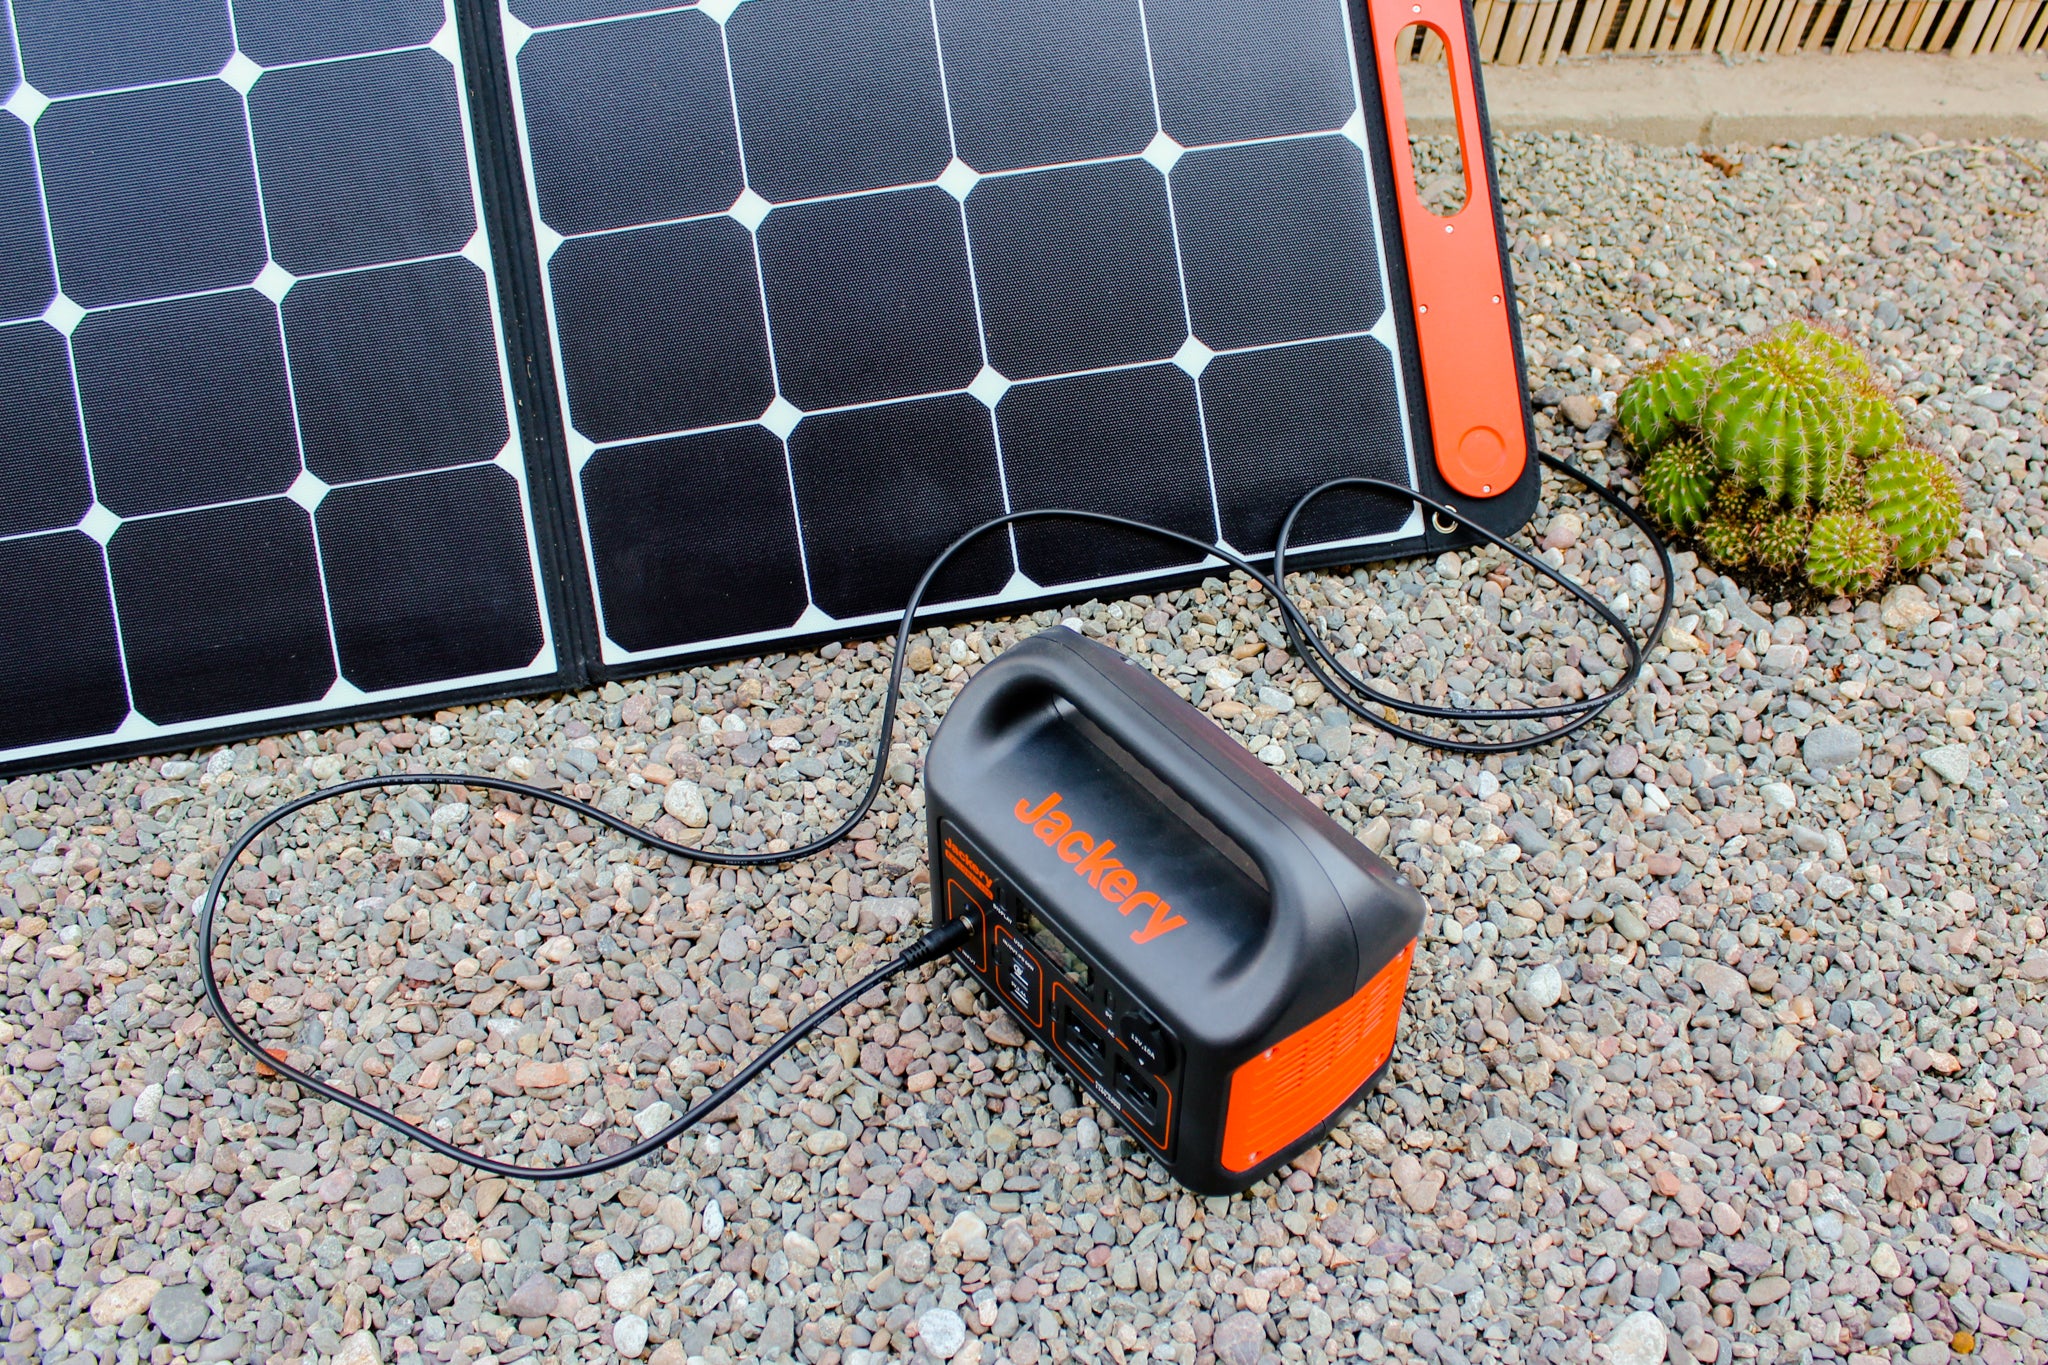 Can a Solar Generator Power a Space Heater?